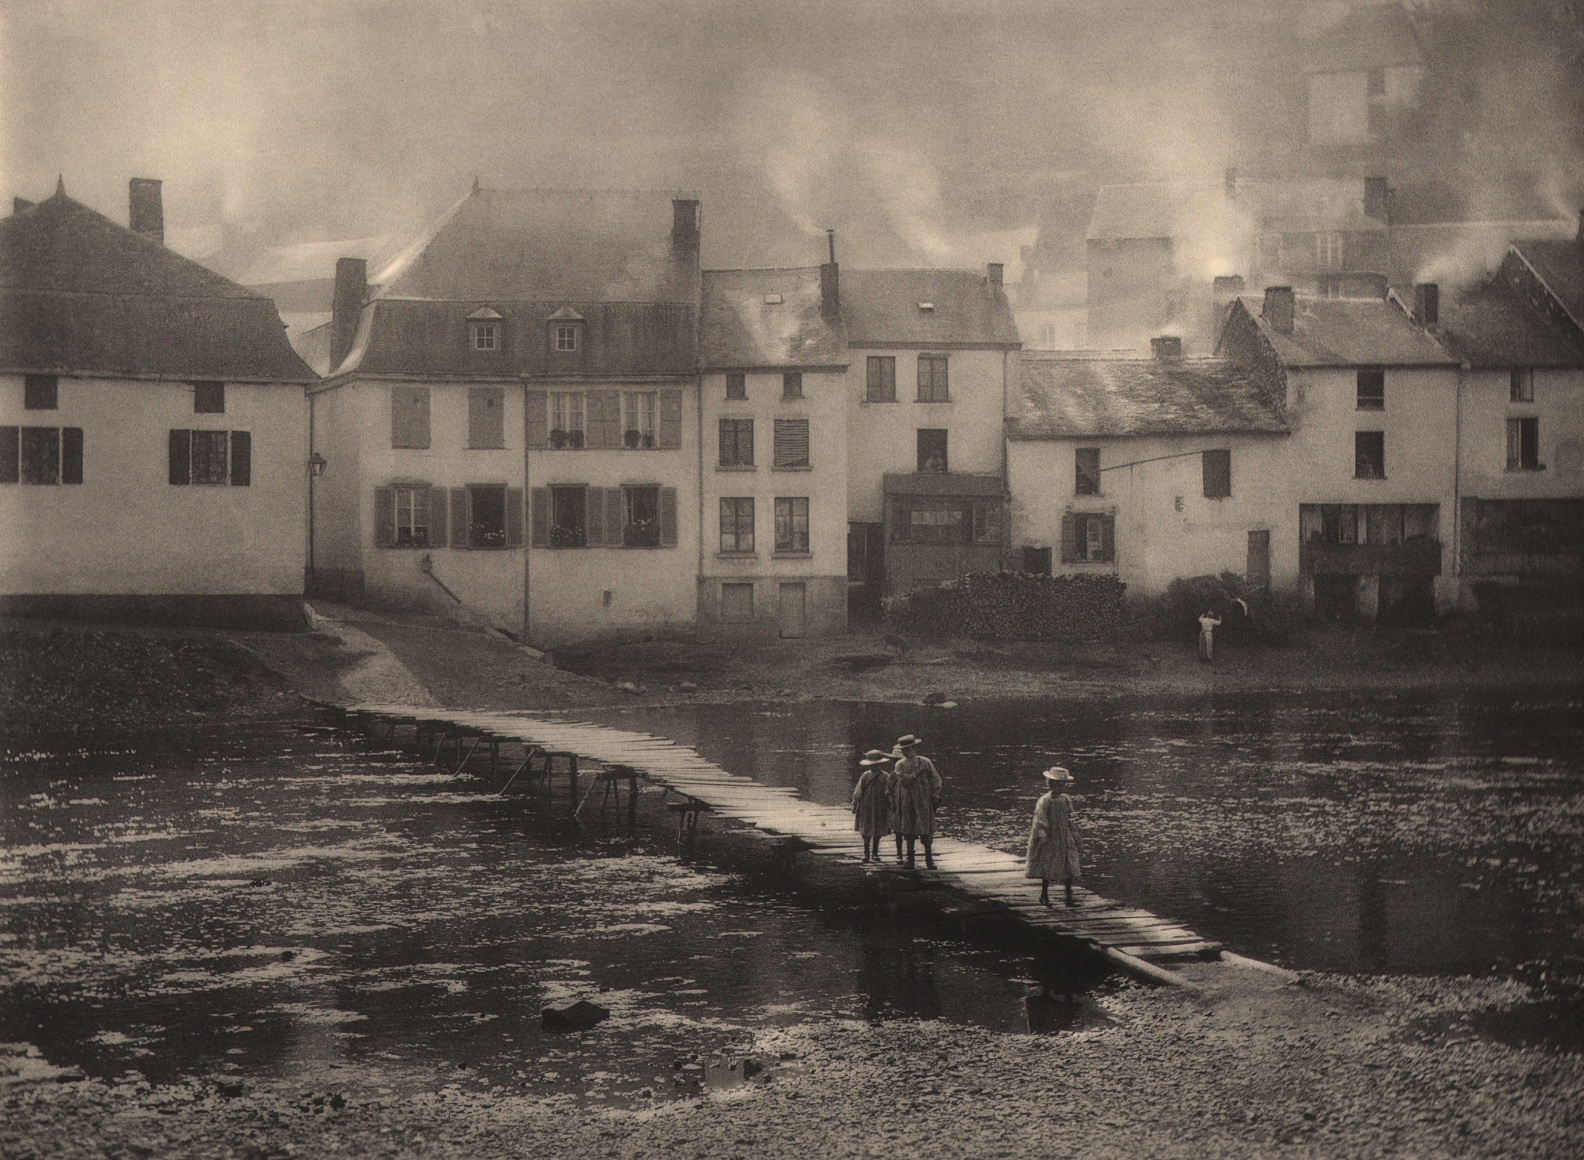 15. L&eacute;onard Misonne, On alume le jeux, 1924. Three young girls walk across a small body of water on a wooden dock. Waterside homes with smoke rising above them in the background. Sepia-toned print.